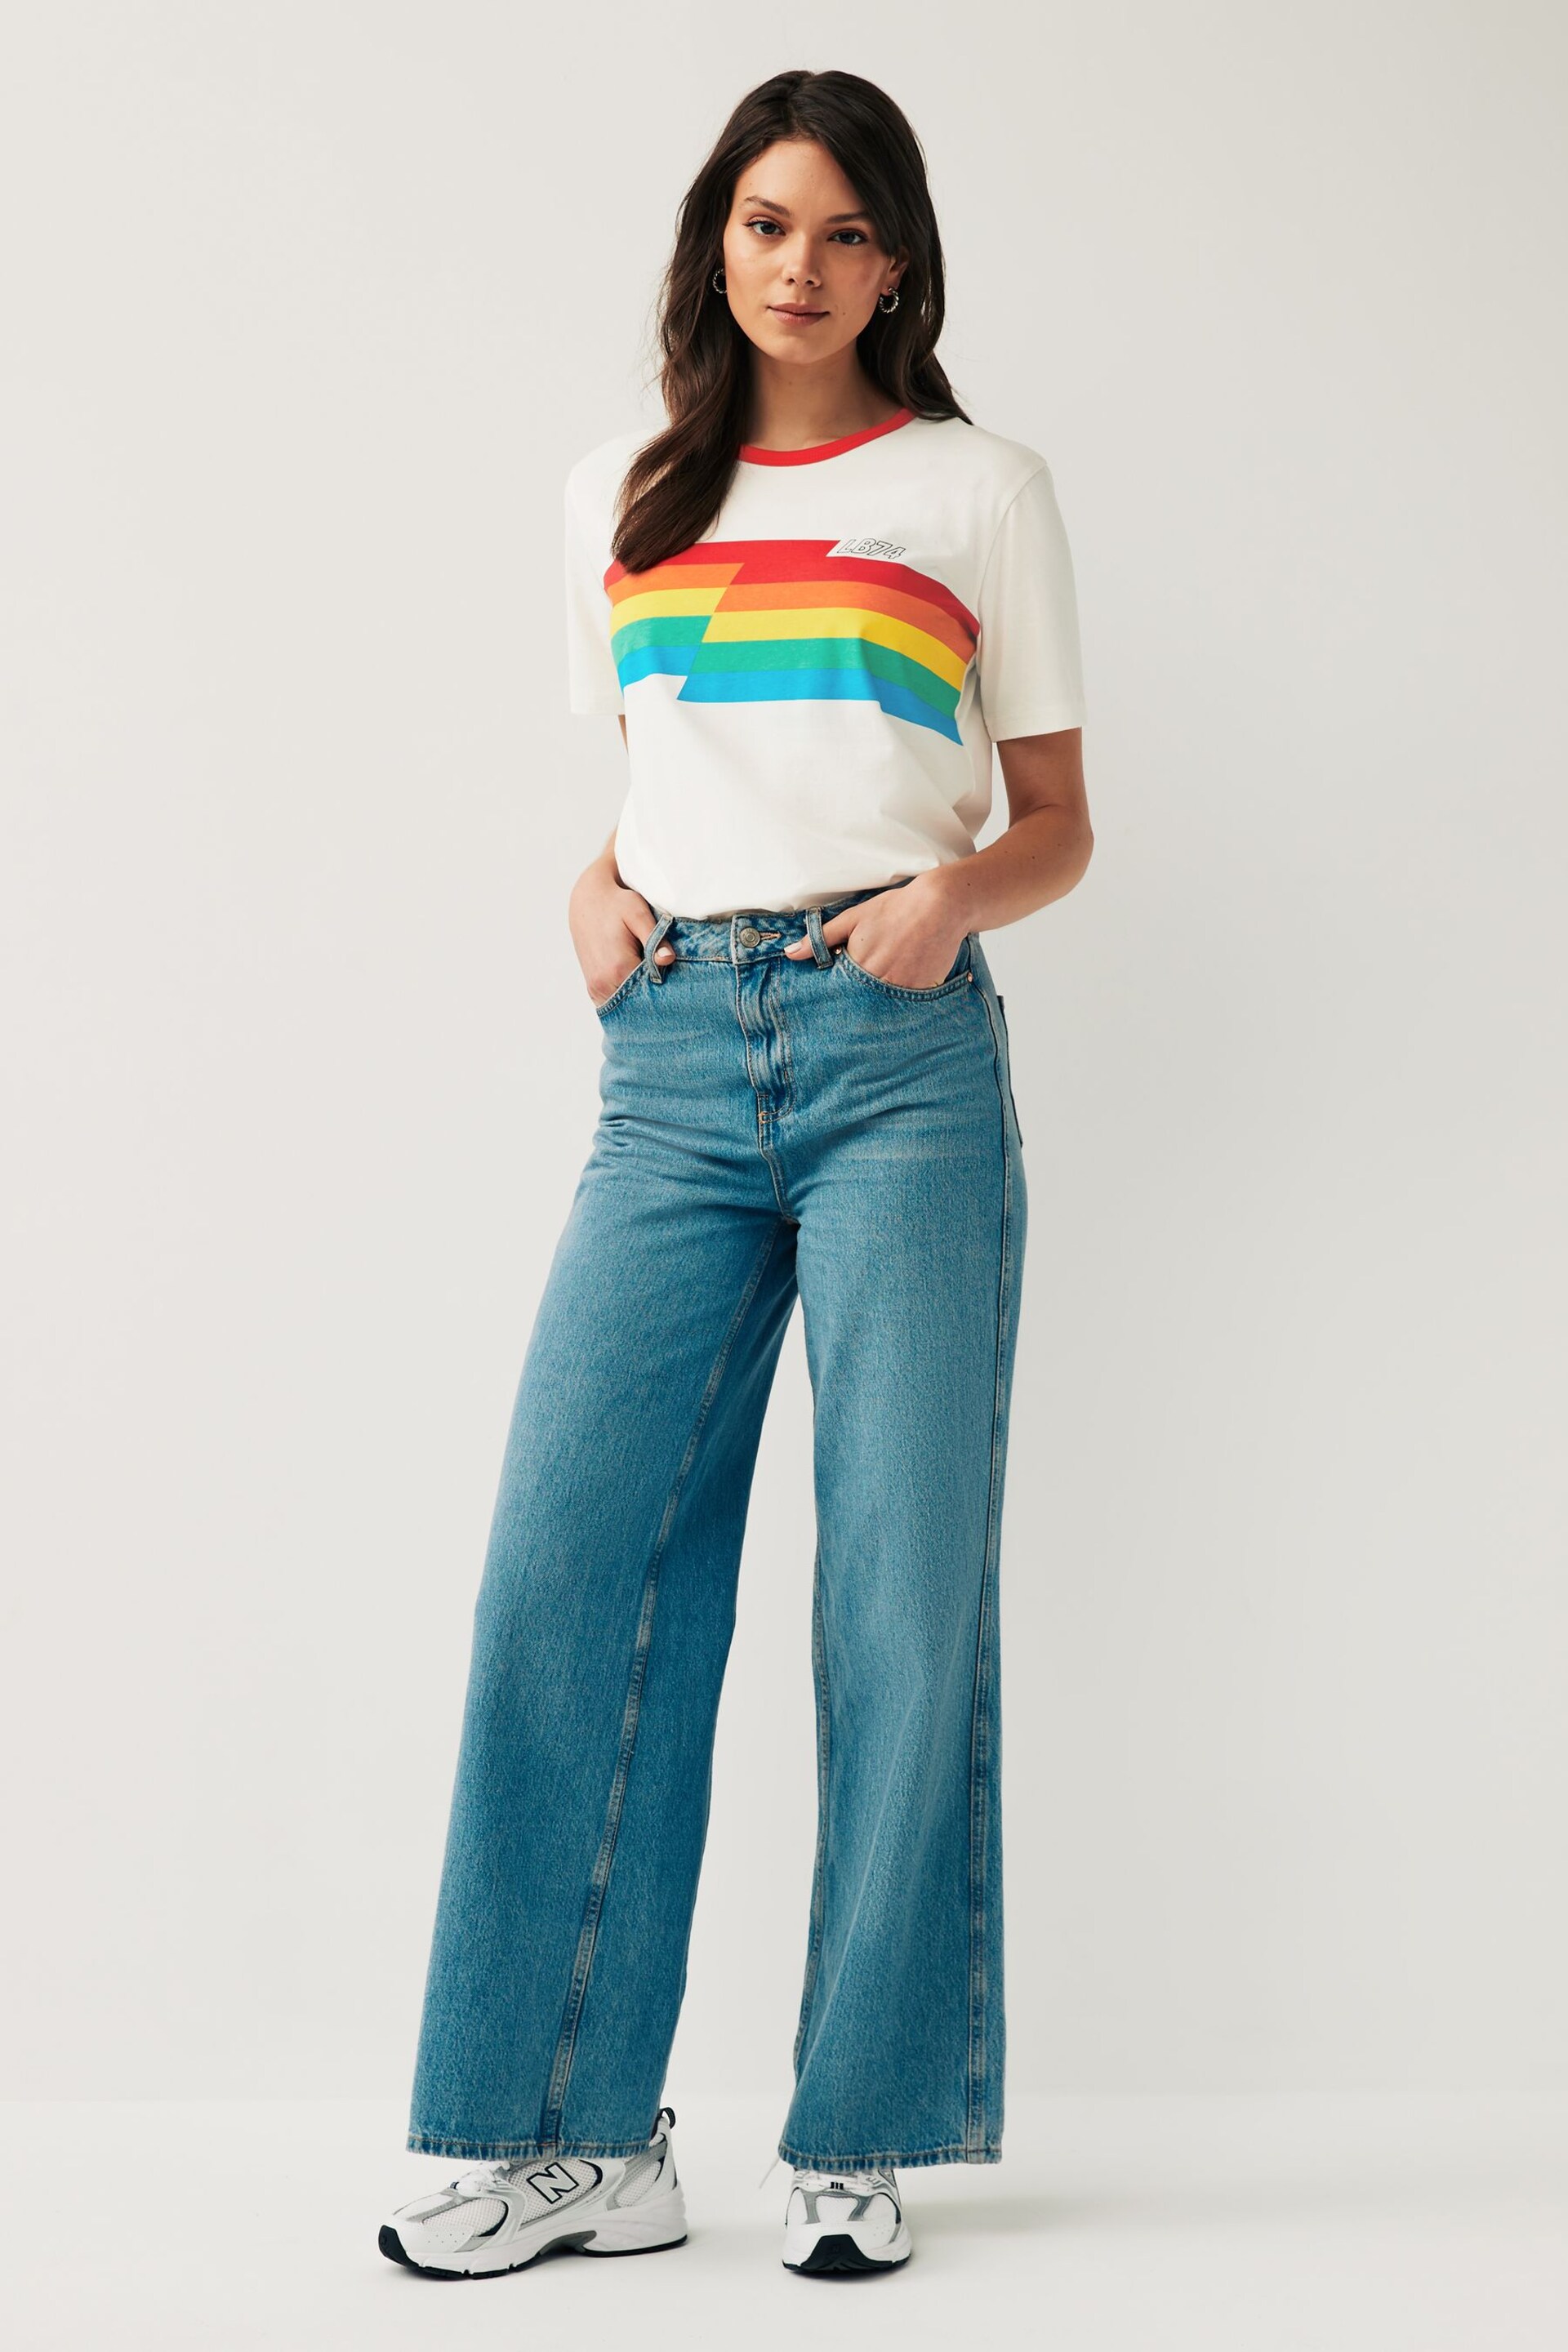 Little Bird by Jools Oliver Red Adults Short Sleeve Rainbow Stripe T-Shirt - Image 3 of 6